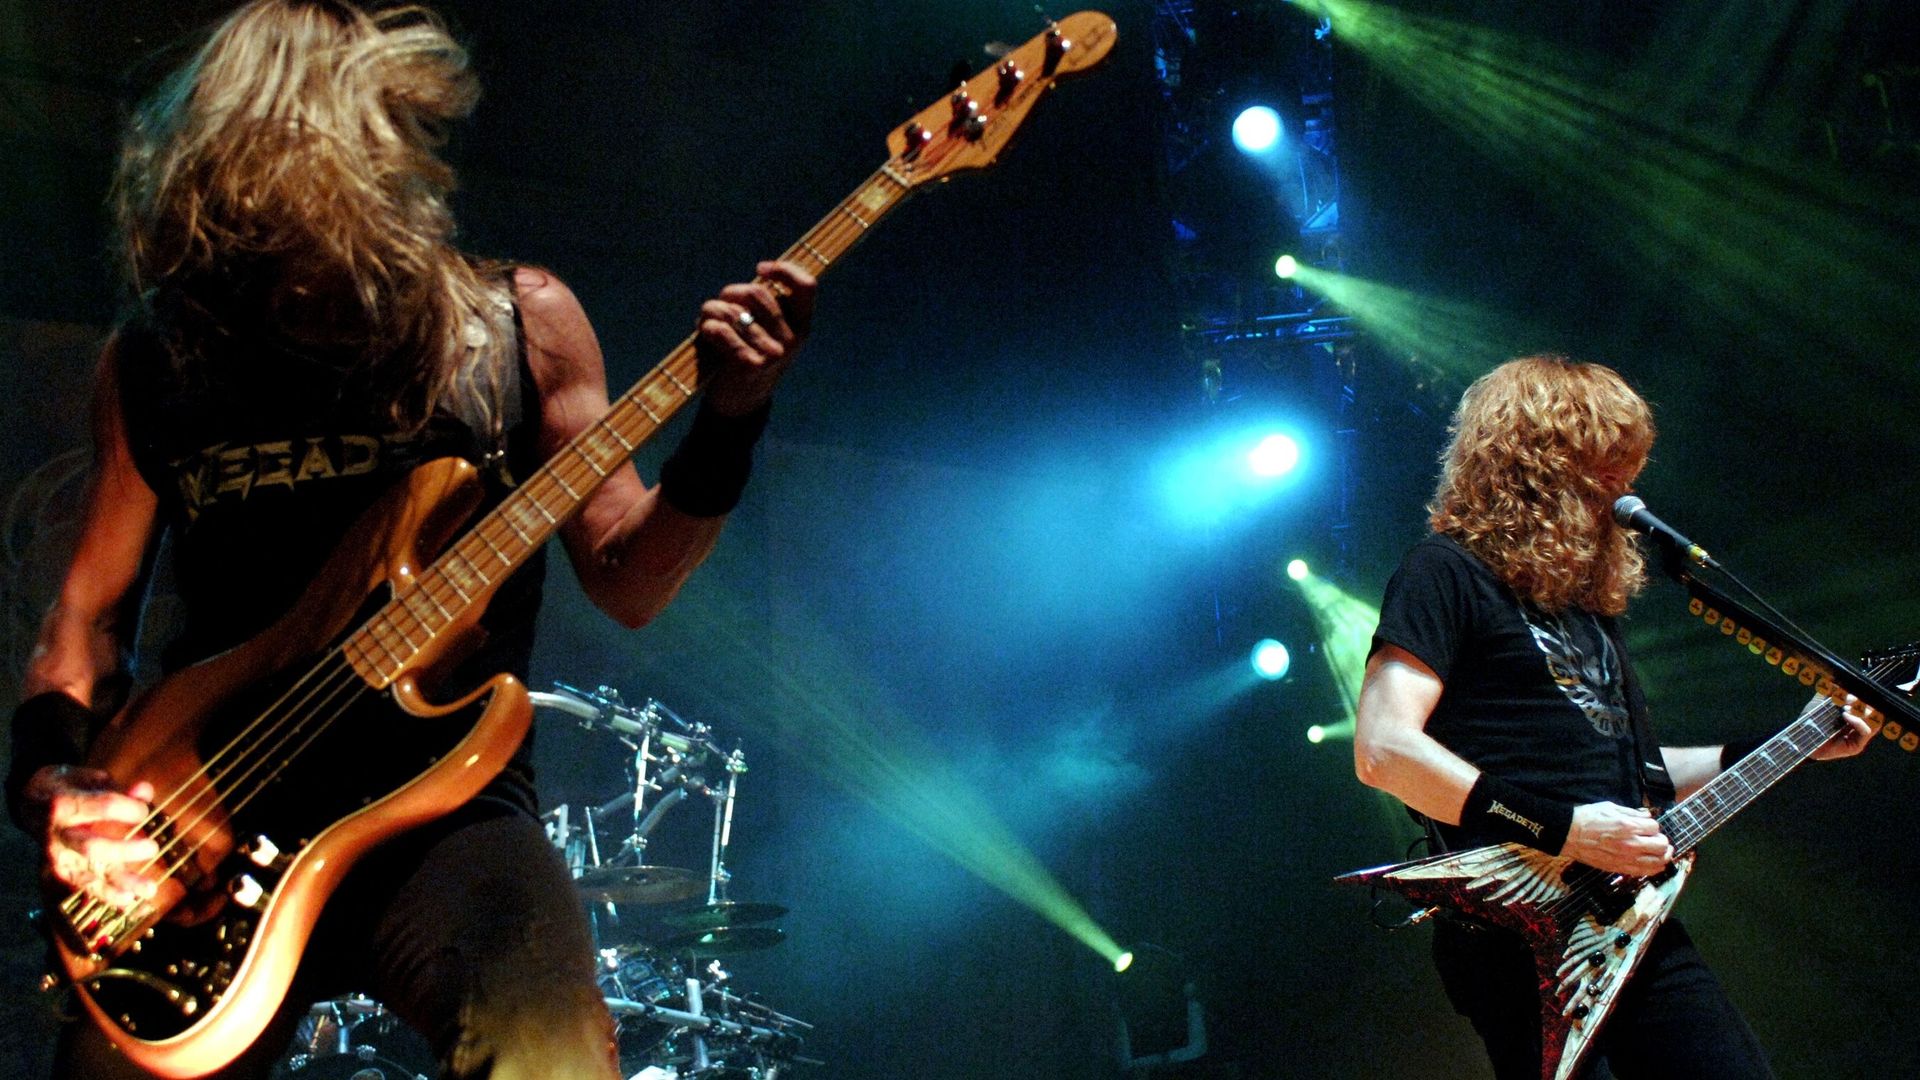 James Lomenzo & Dave Mustaine